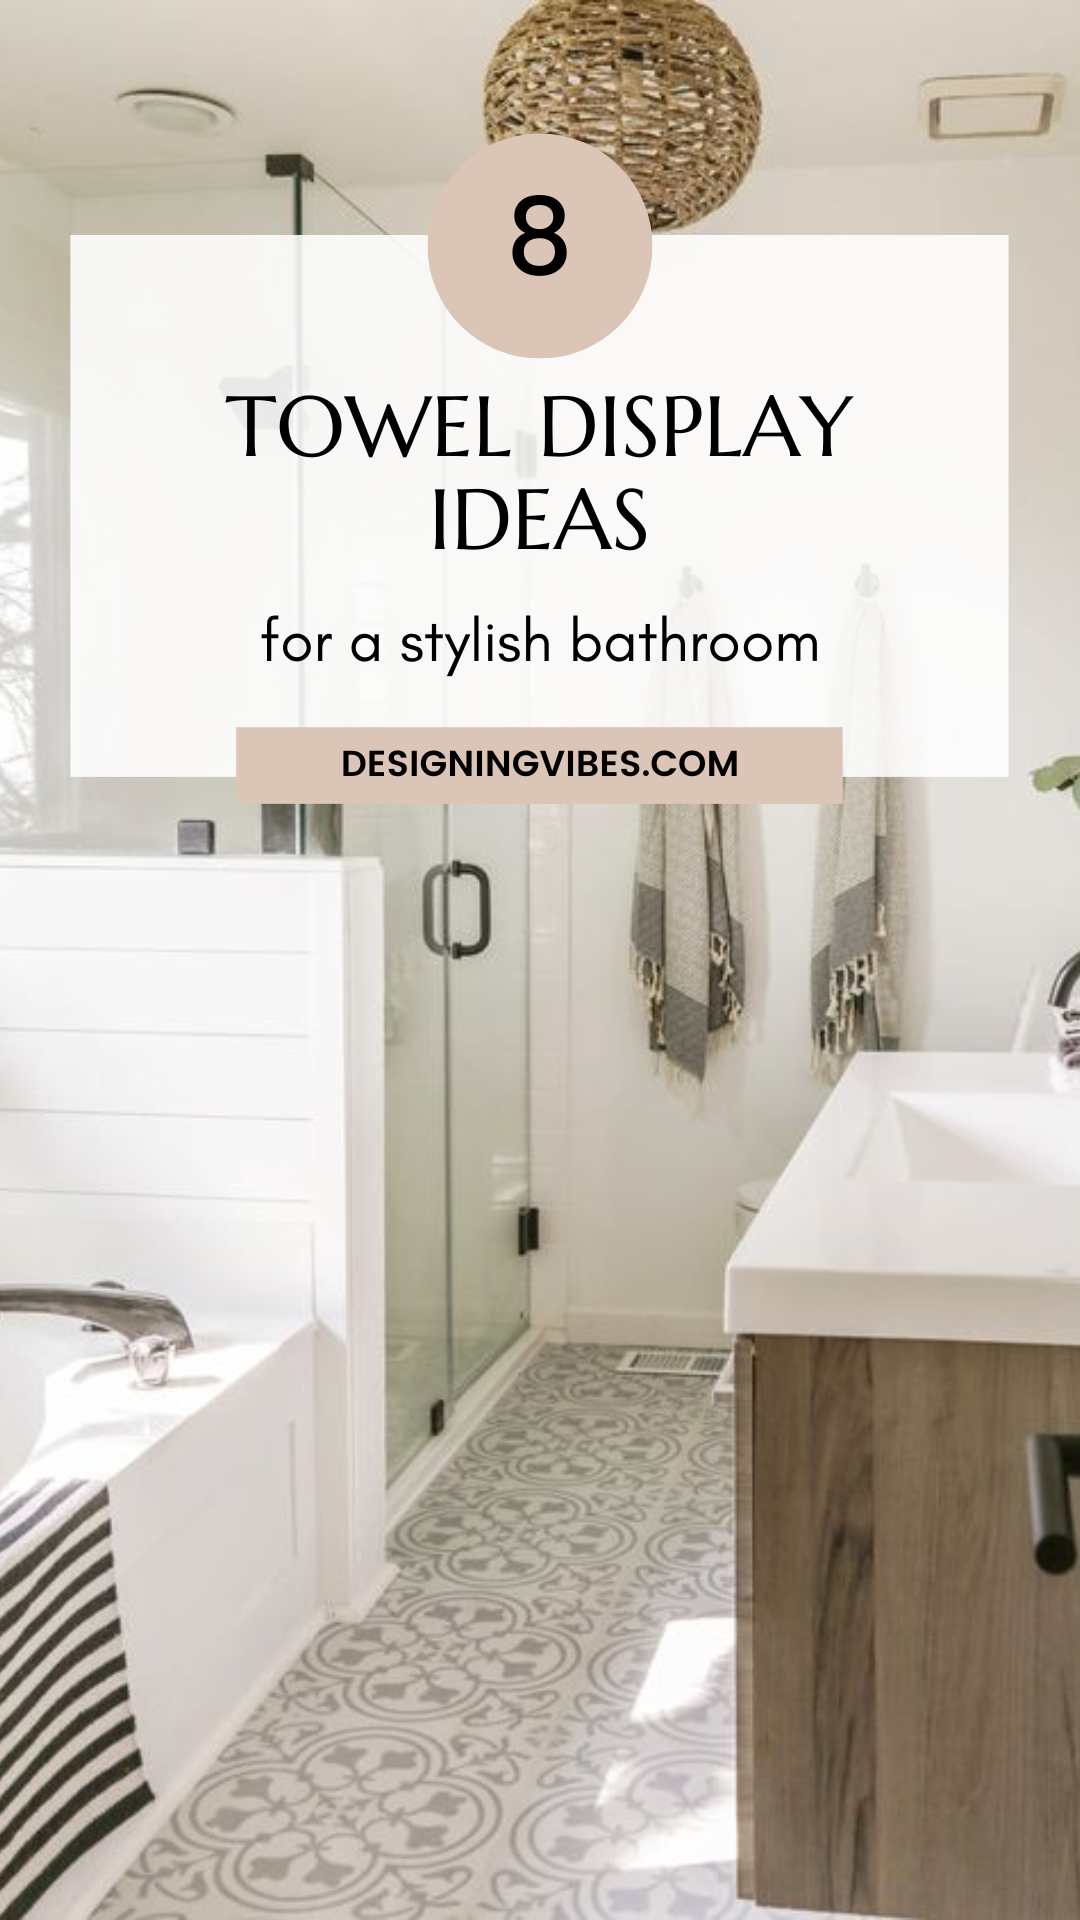 How to Pick the Best Luxury Bath Towels to Match Your Bathroom Design